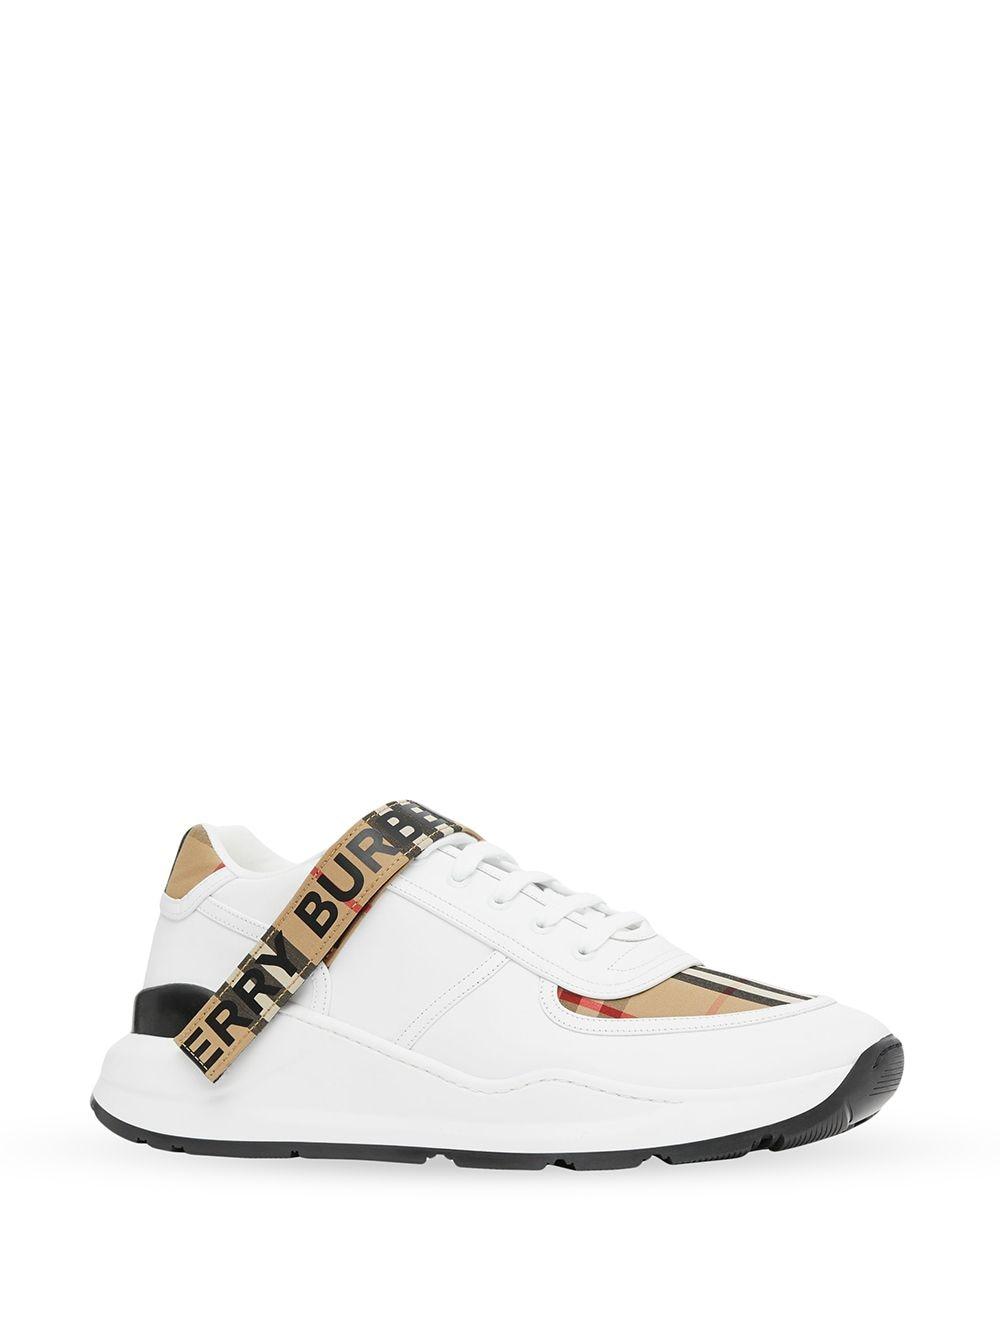 Burberry Ronnie Sneaker in White for Men | Lyst